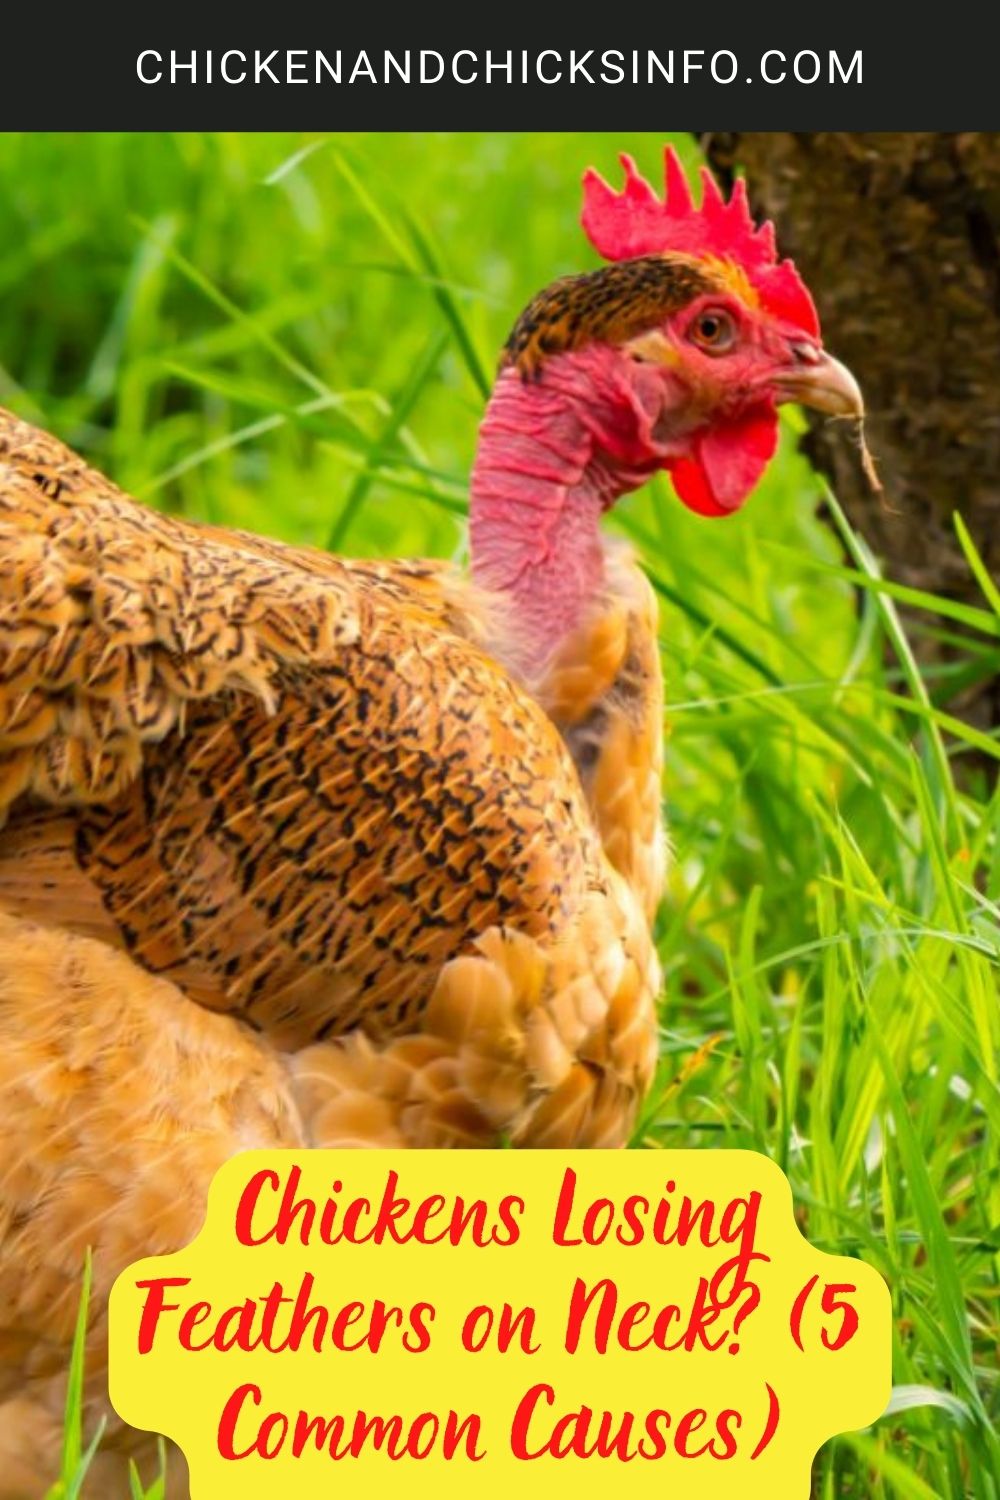 Chickens Losing Feathers on Neck? (5 Common Causes) poster.
